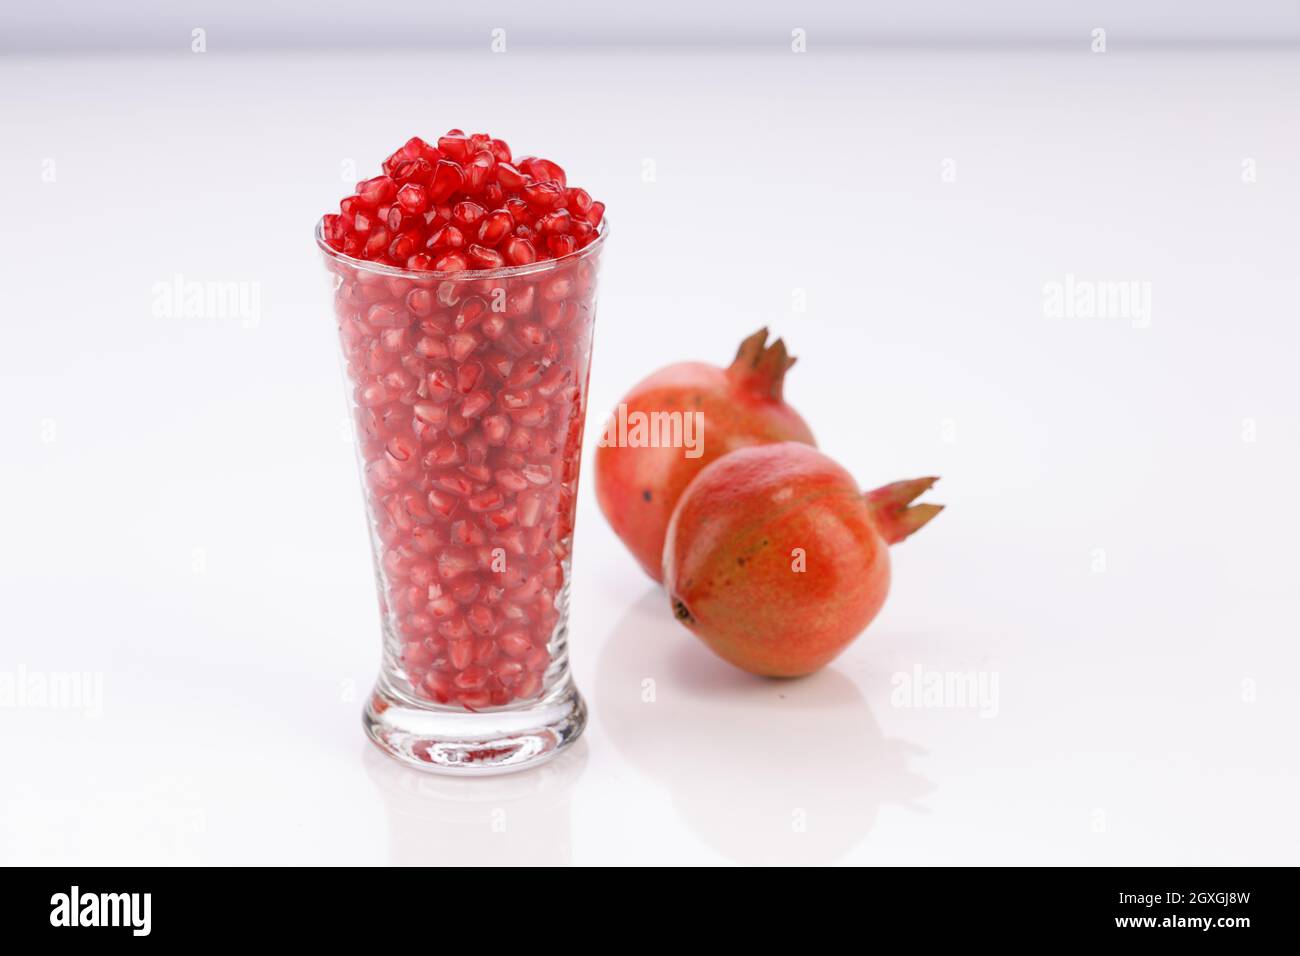 Fresh Pomegranate seed arranged in a glass container with fresh fruit placed beside it on white background, isolated. Stock Photo